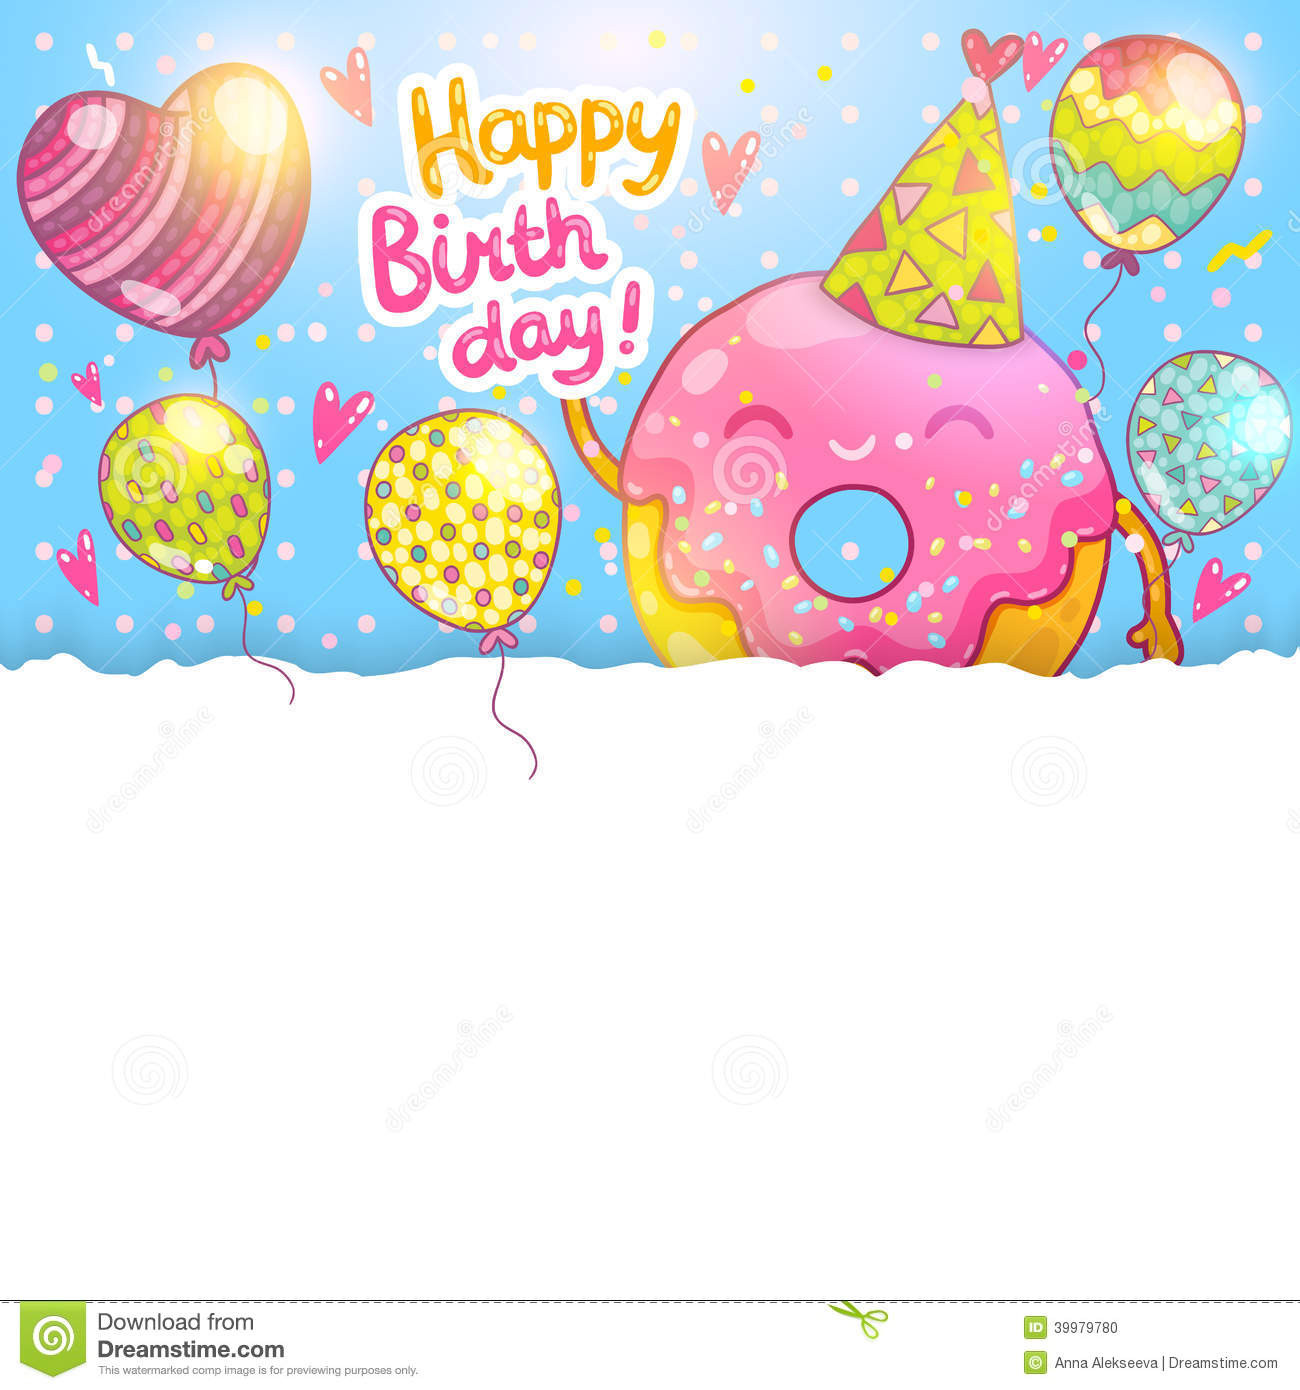 Happy Birthday Card Template
 Happy Birthday Card Background With Cute Donut Stock